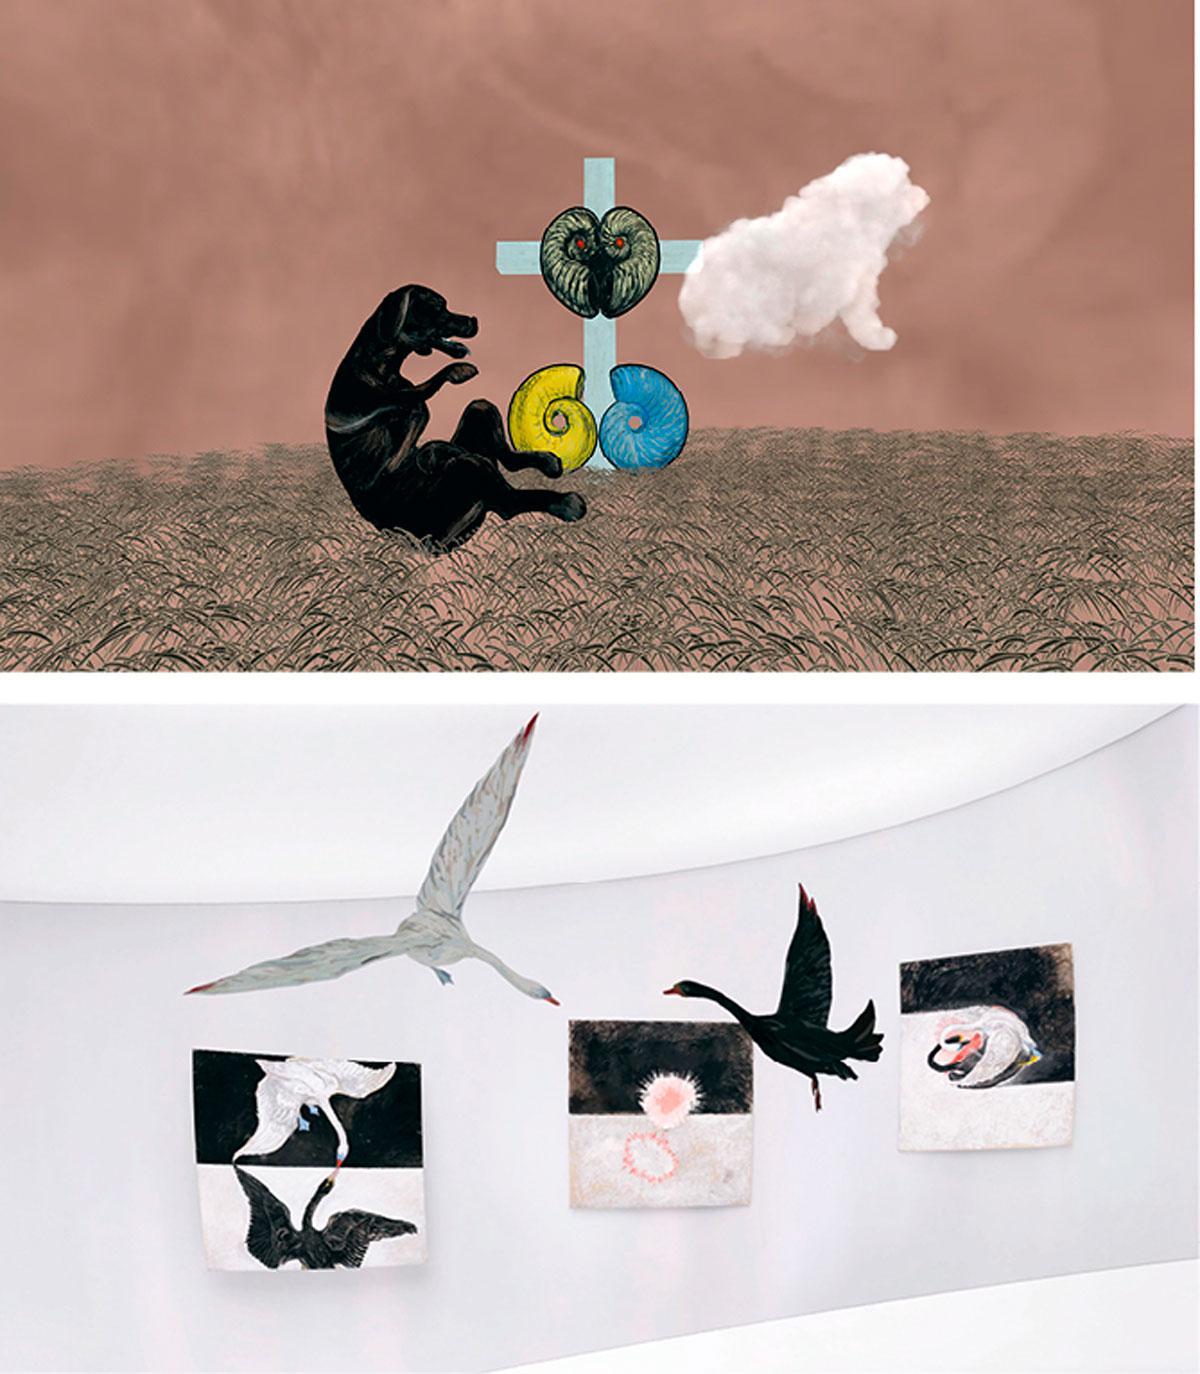 Stills from the virtual reality Temple, Hilma af Klint, 2022